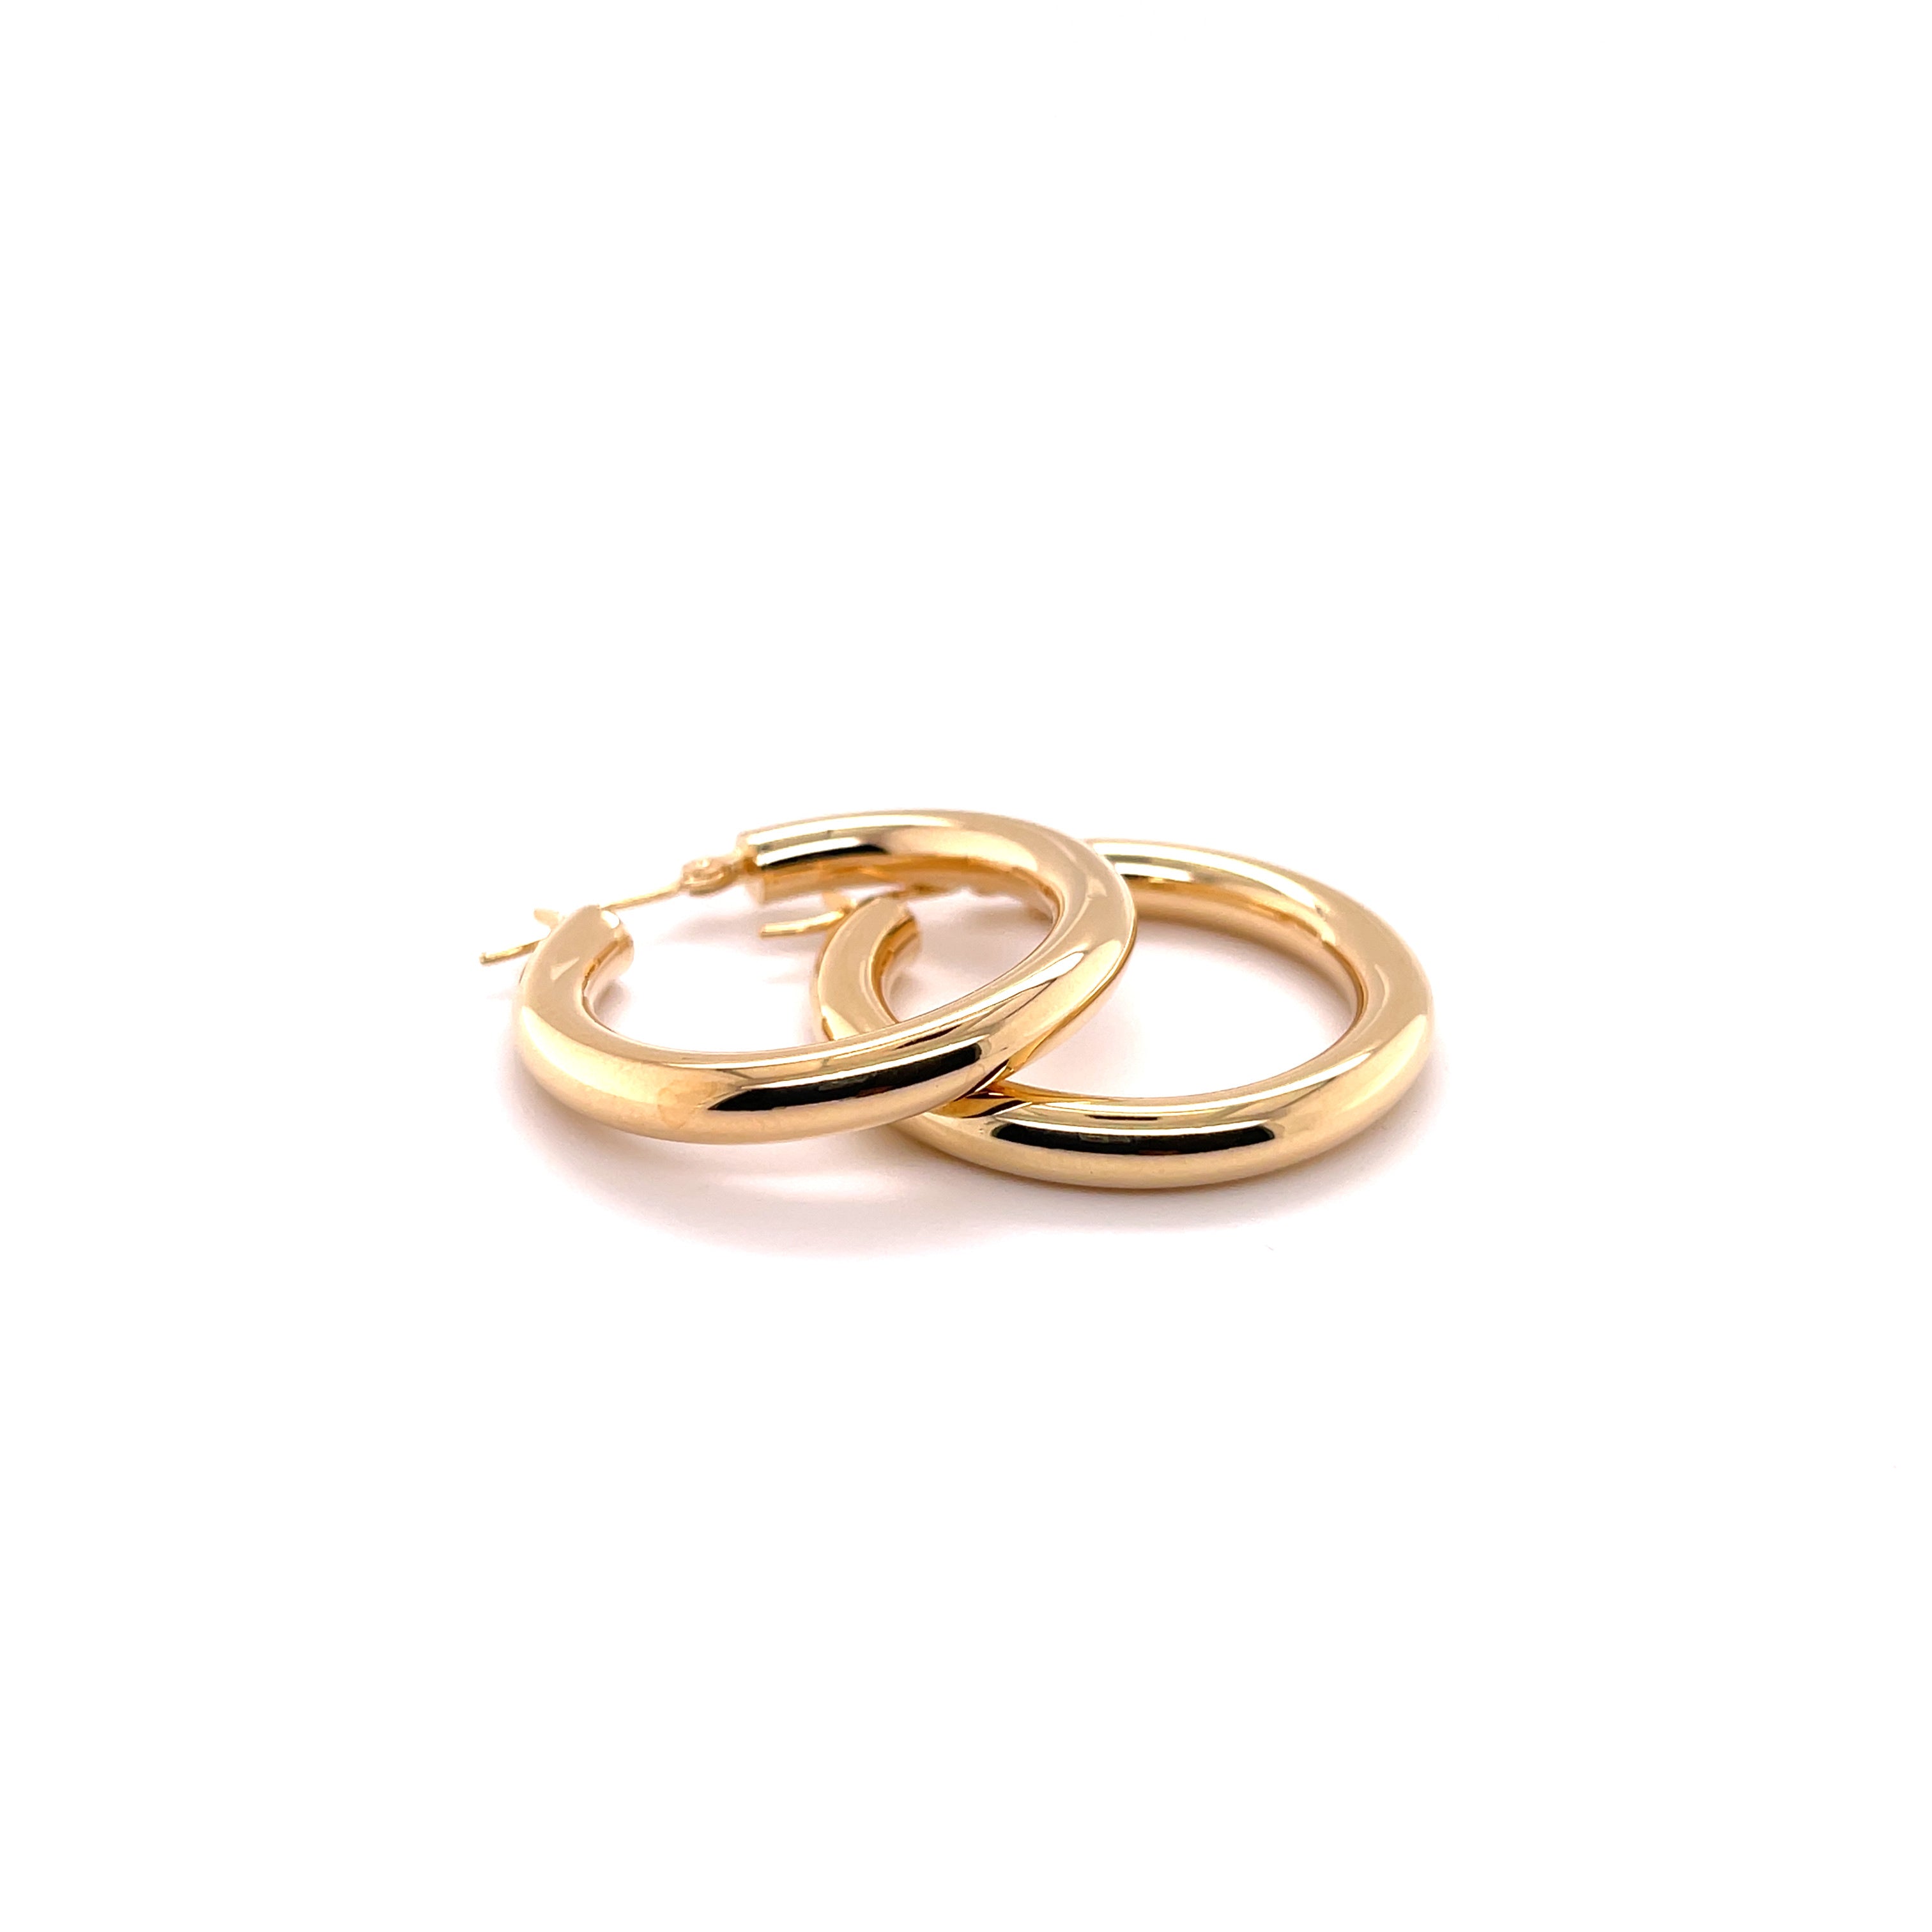 Thick 4 mm 14K Gold Polished Hoops 